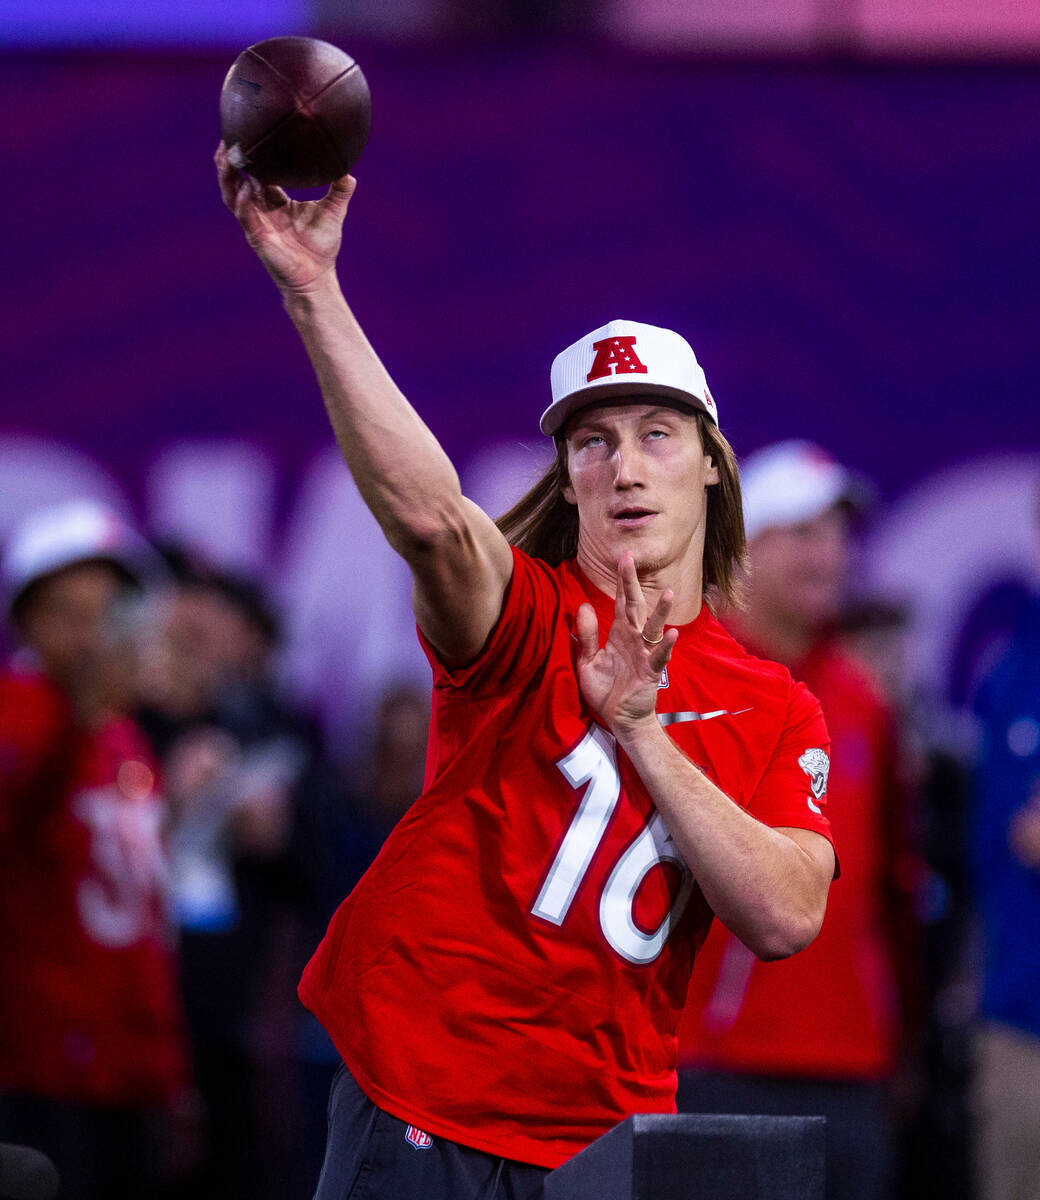 The AFC's Trevor Lawrence (16) with the Jaguars gets off a throw in a precision pass event duri ...